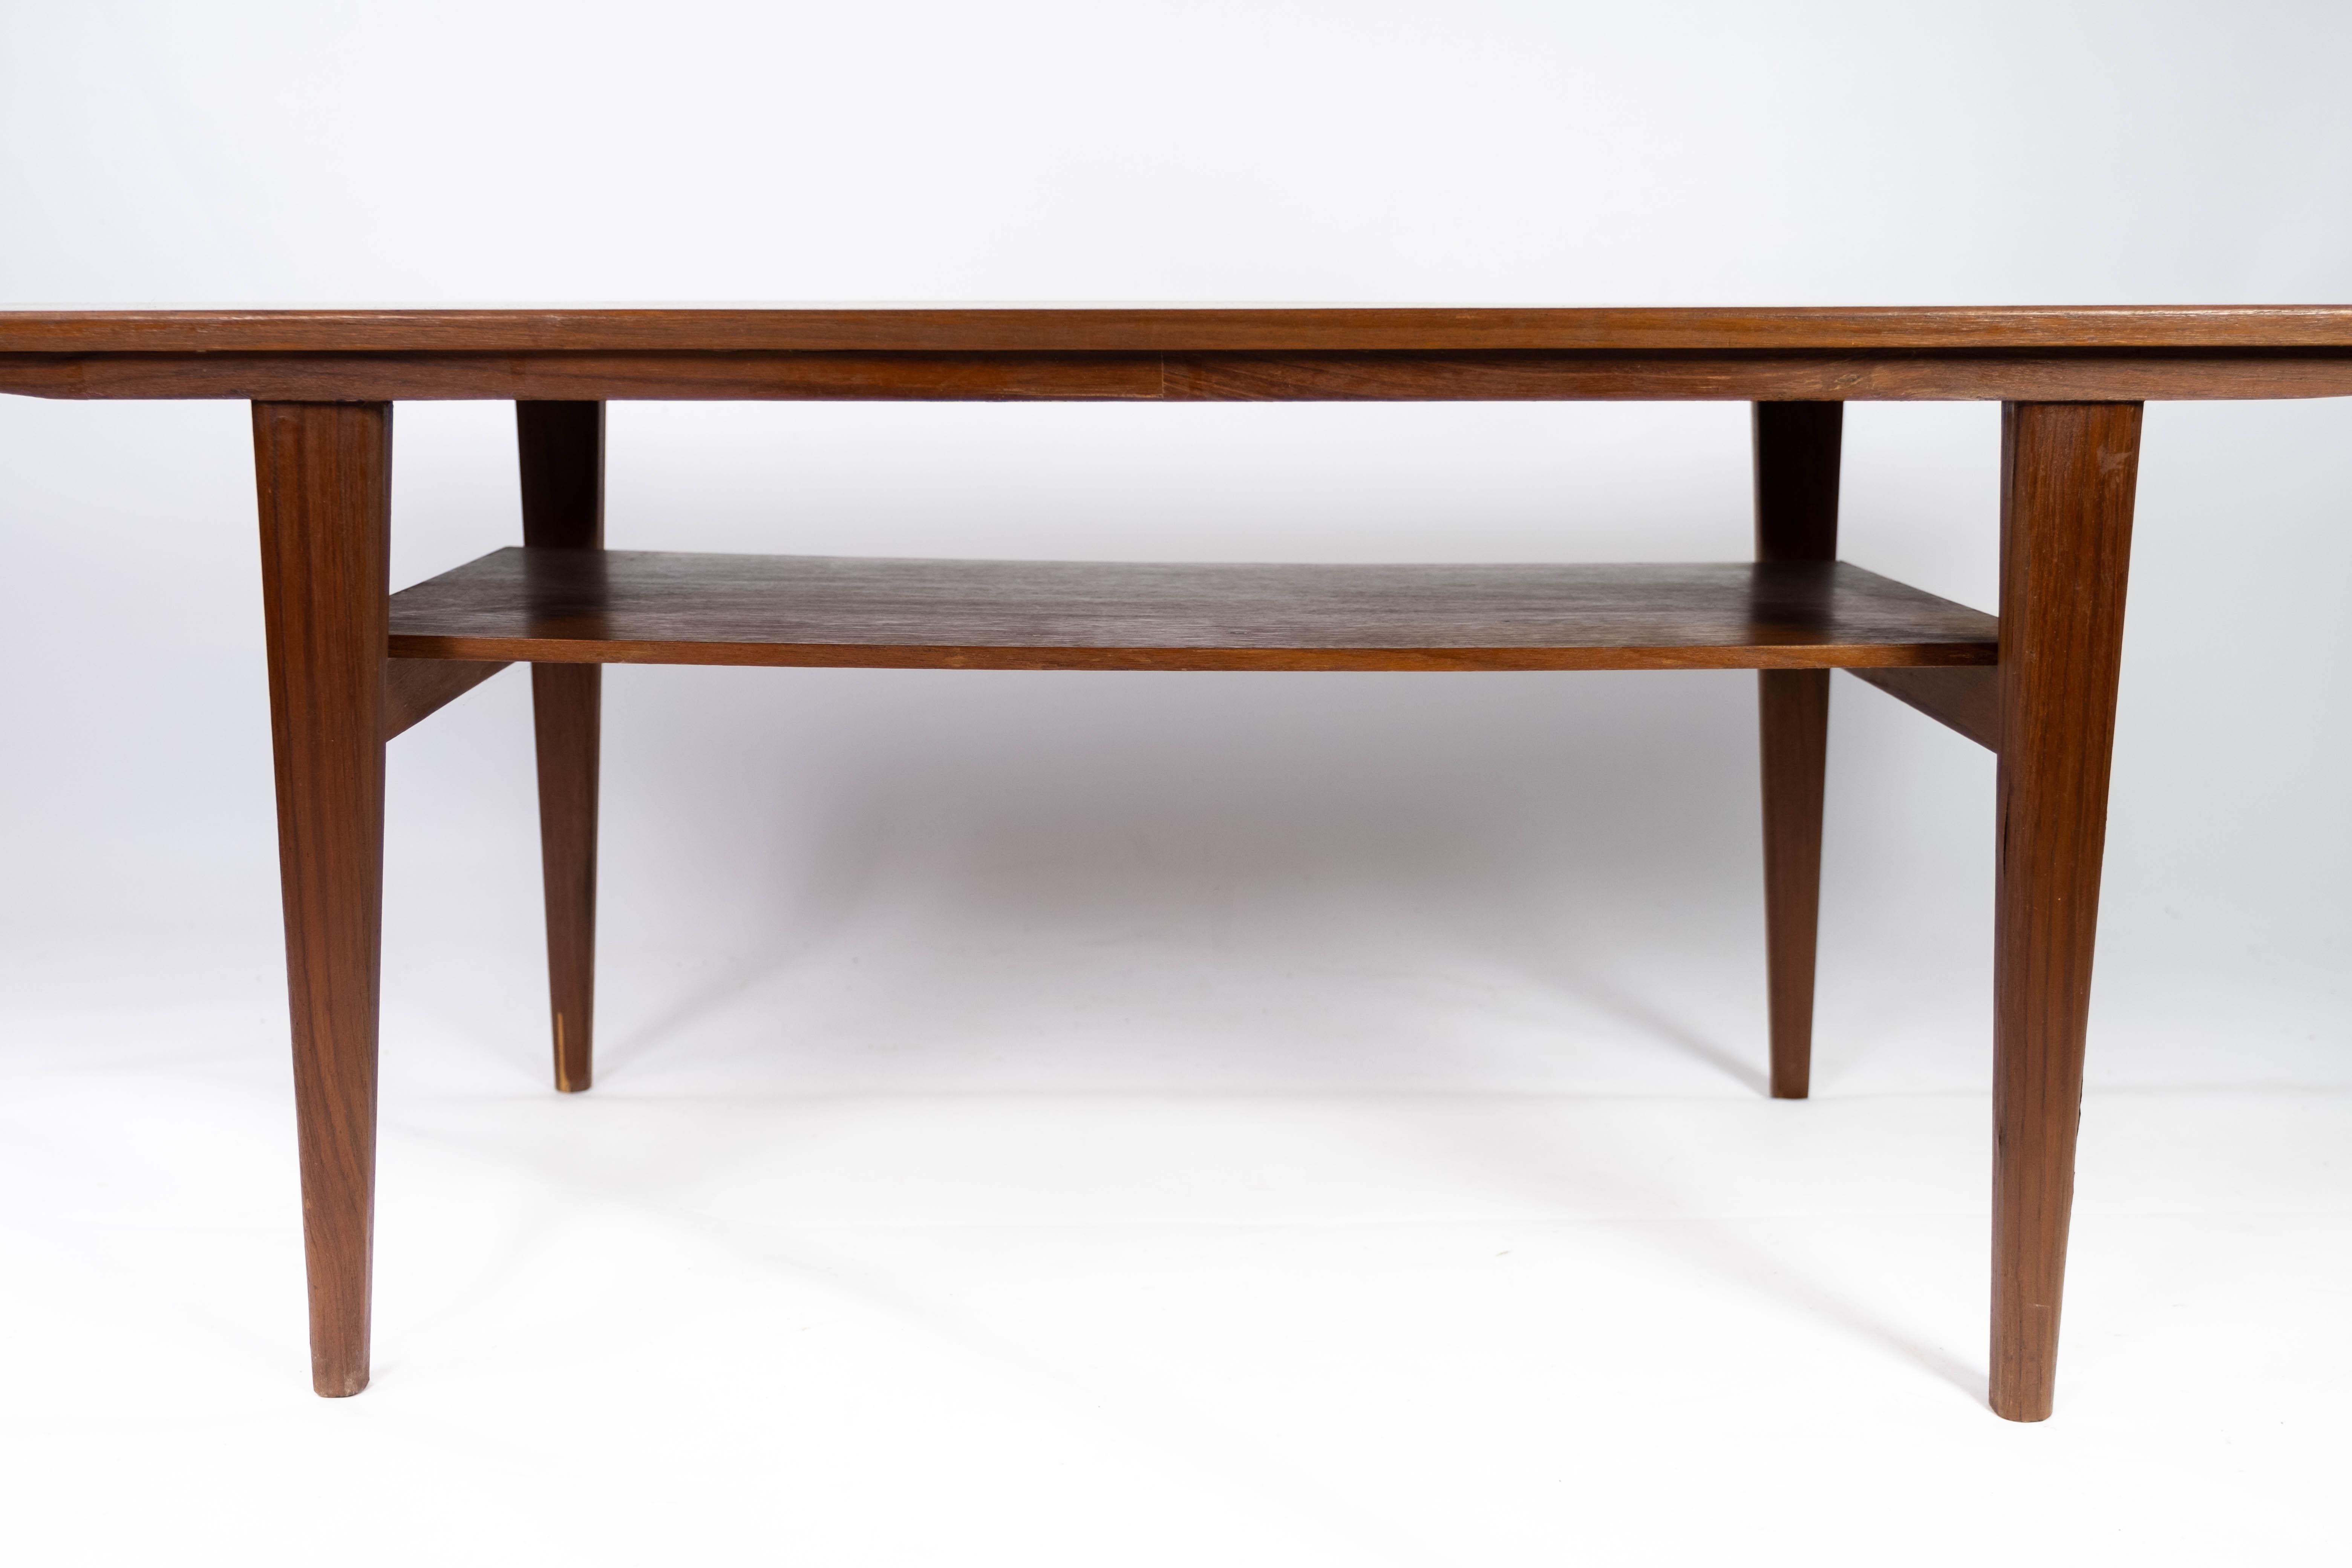 Coffee Table Made In Teak With Shelf, Danish Design From 1960s In Good Condition For Sale In Lejre, DK